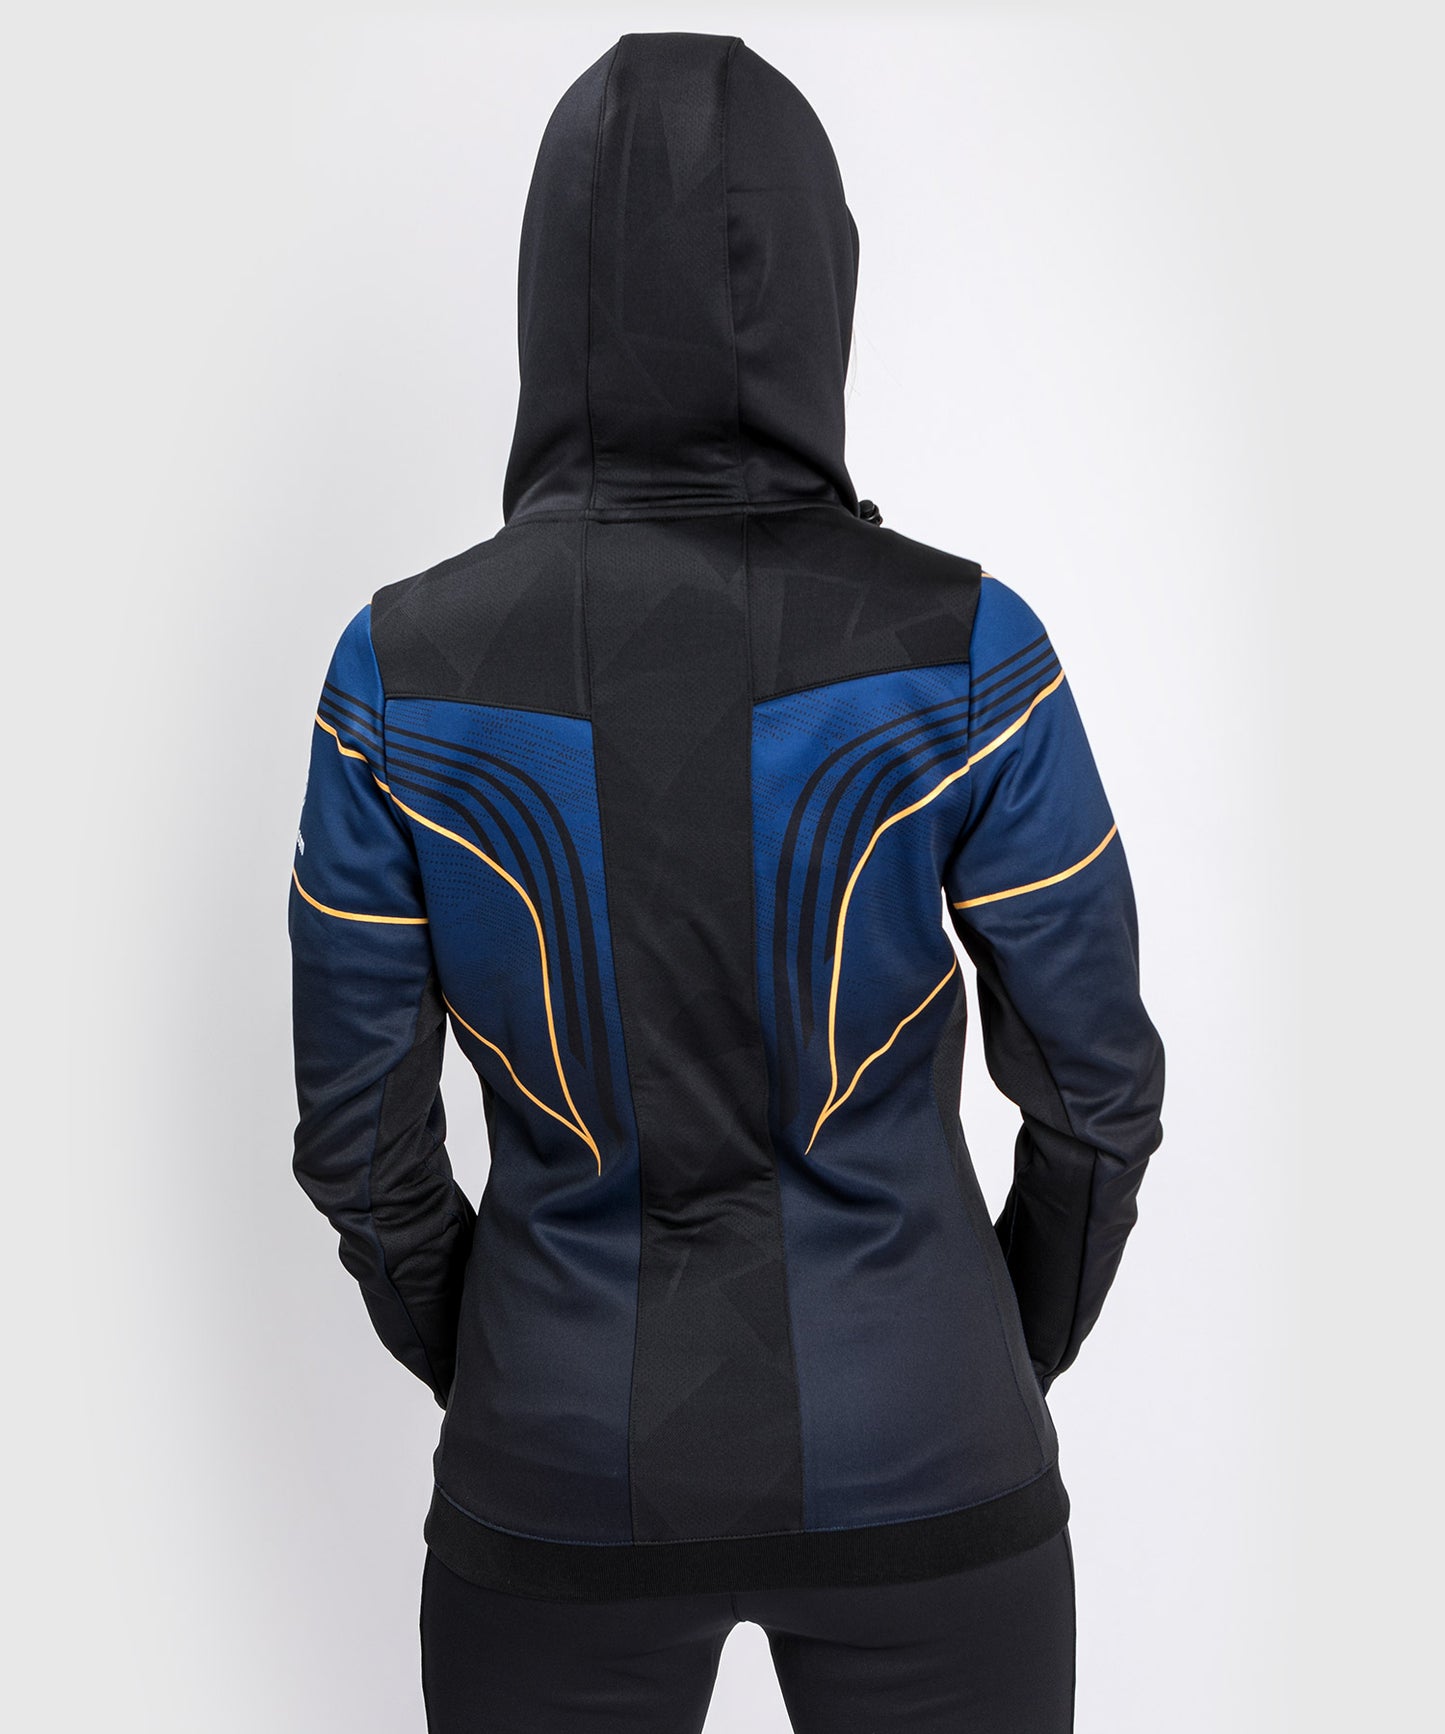 Ufc Authentic Fight Night 2.0 Kit By Venum Women's Walkout Hoodie - Midnight Edition - Champion